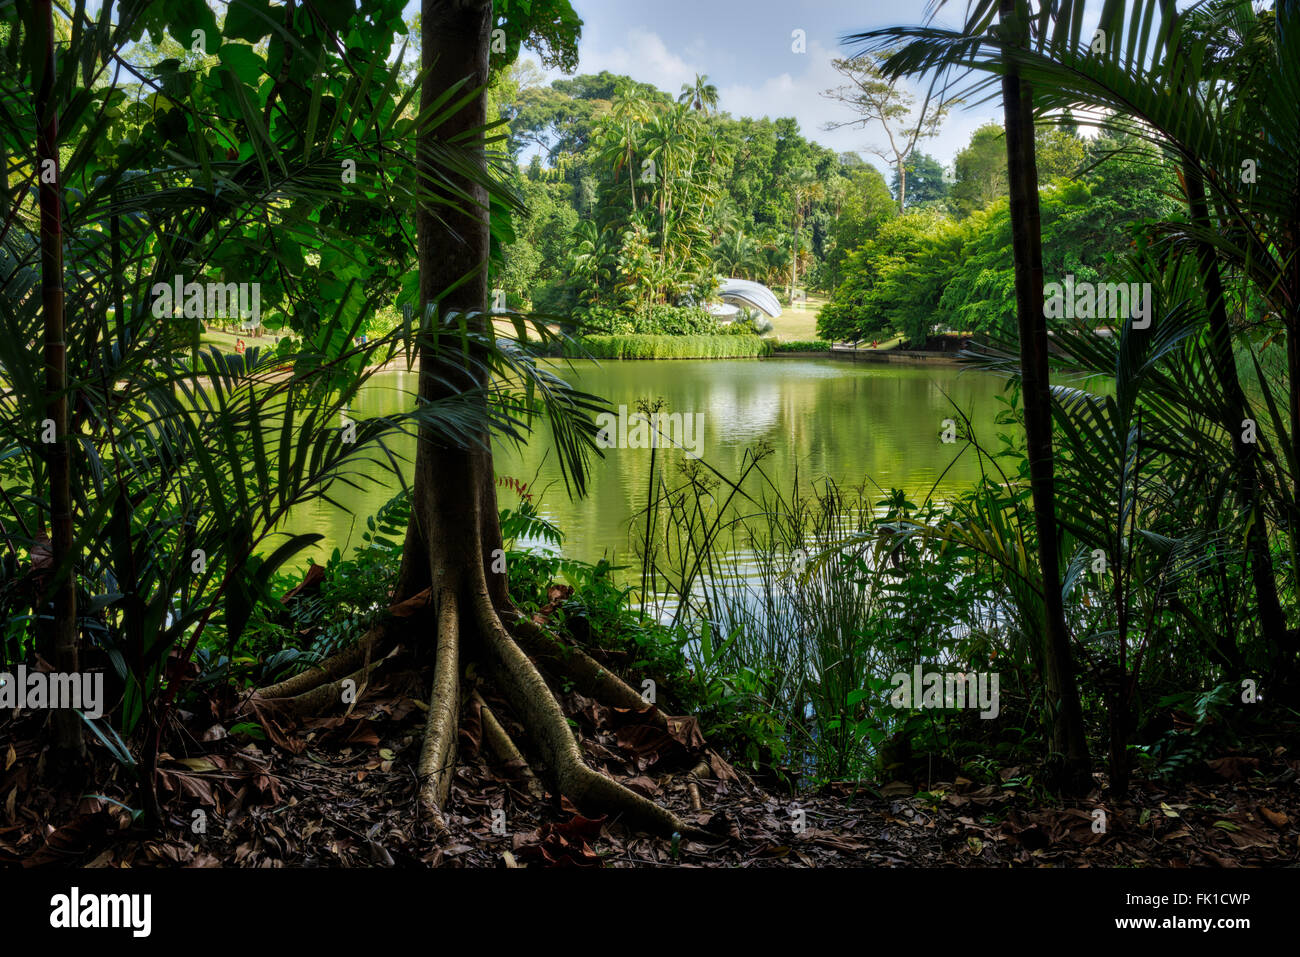 Concert stage over the lake, Singapore Stock Photo